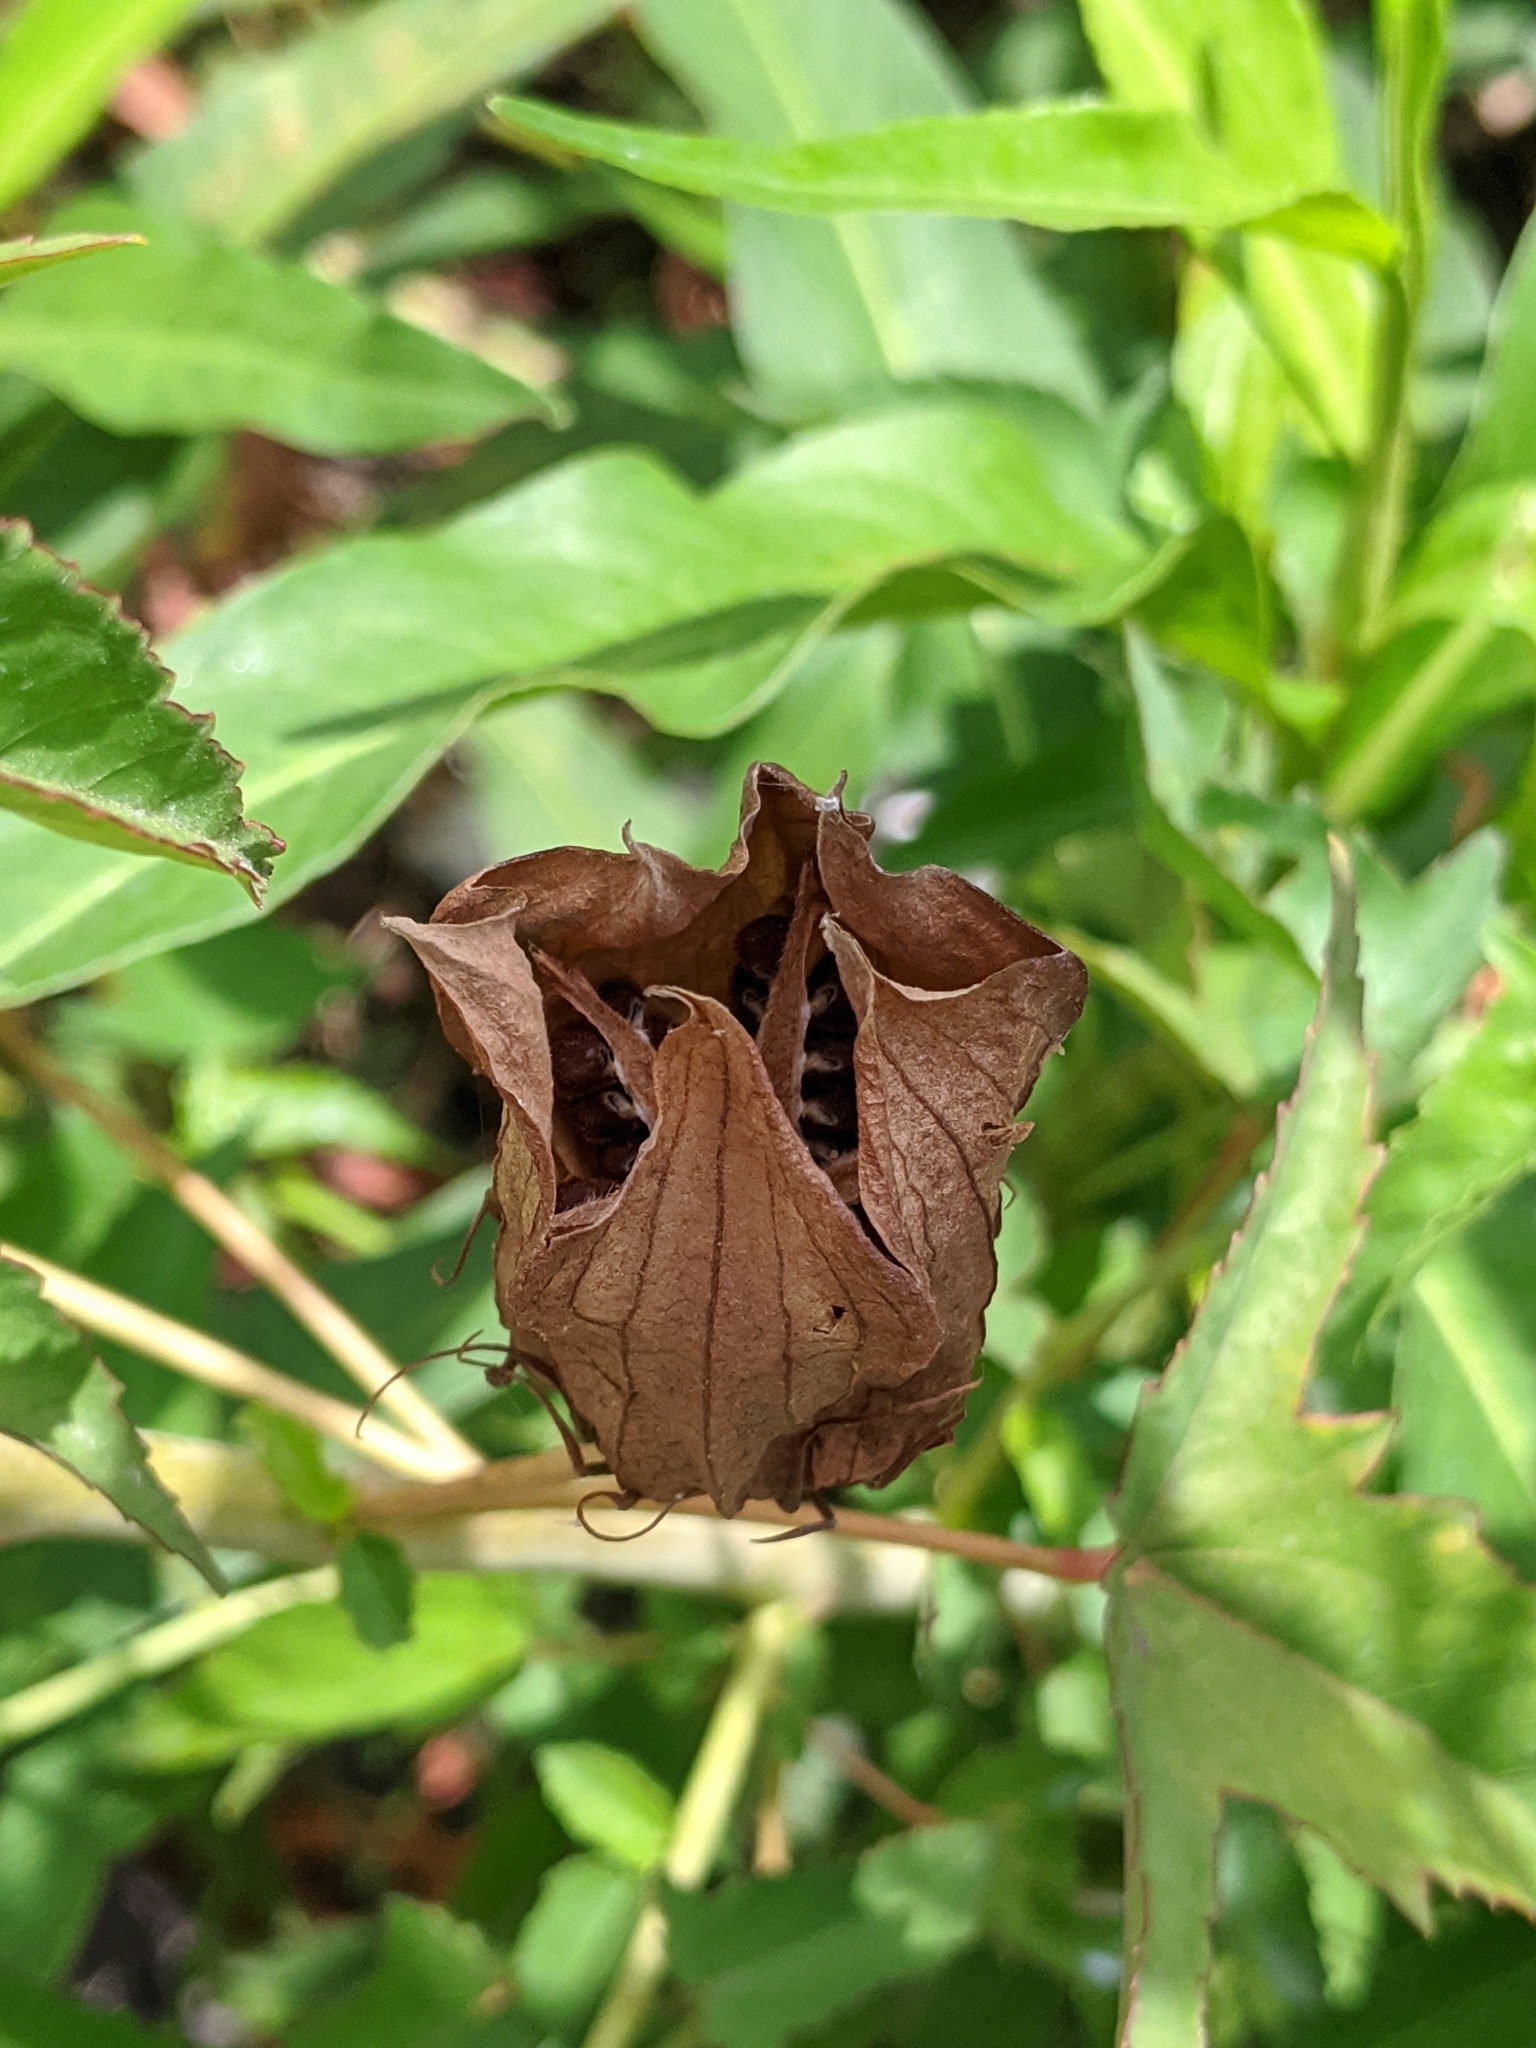 The Scientific Name is Hibiscus laevis [= Hibiscus militaris]. You will likely hear them called Smooth Rose-mallow, Halberd-leaved Marsh-mallow, Showy Hibiscus. This picture shows the The fruit is a capsule. of Hibiscus laevis [= Hibiscus militaris]